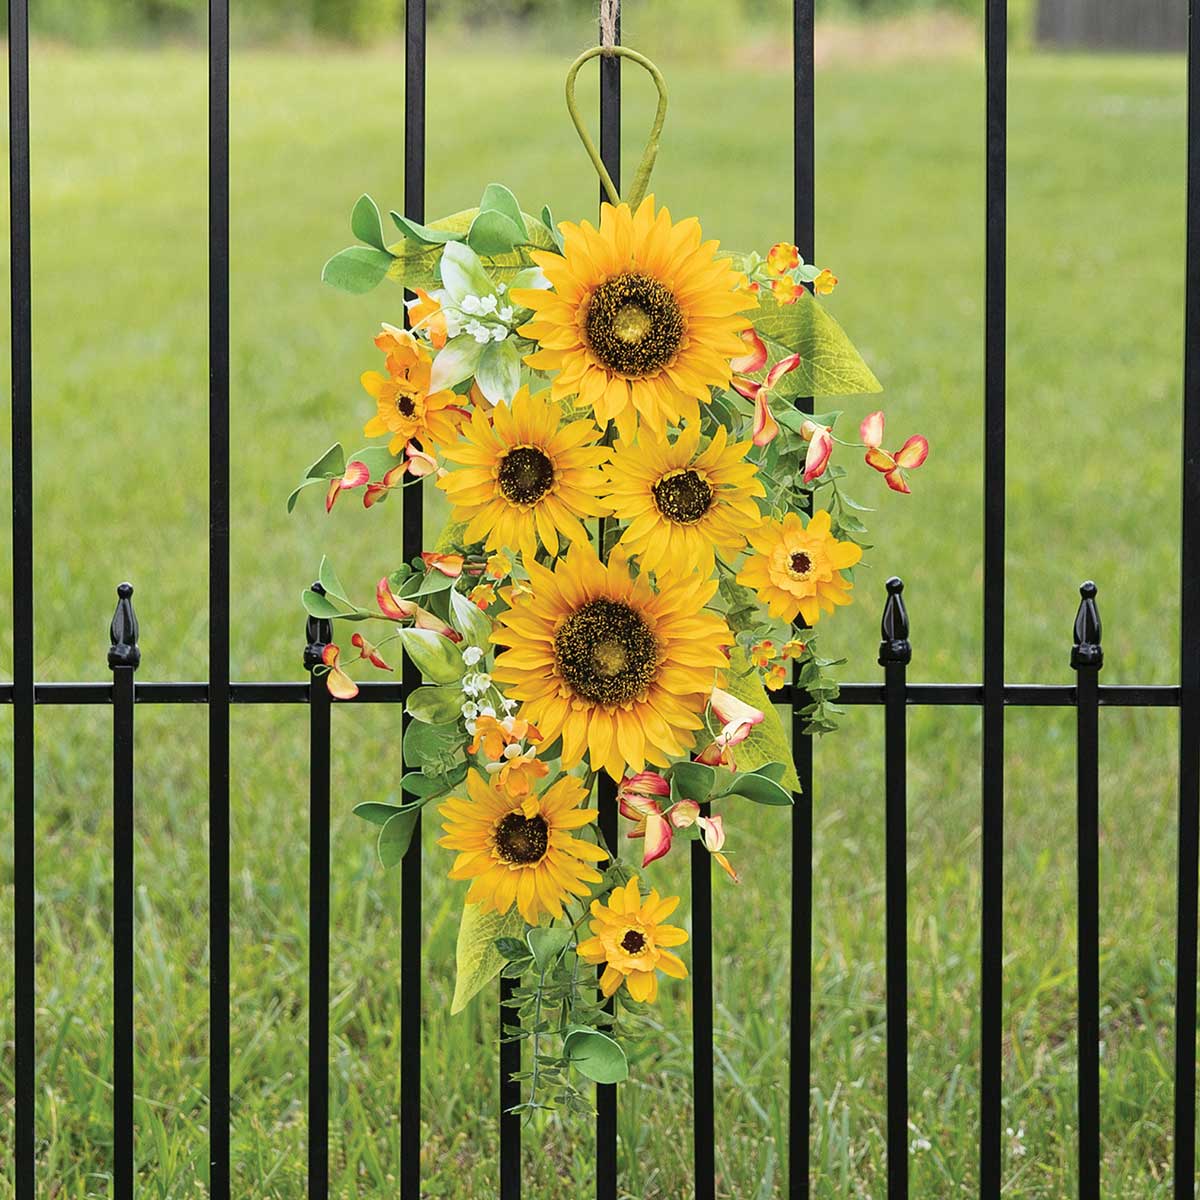 BOUGH SUNFLOWER/DAISY 13IN X 26IN YELLOW/ORANGE POLYESTER